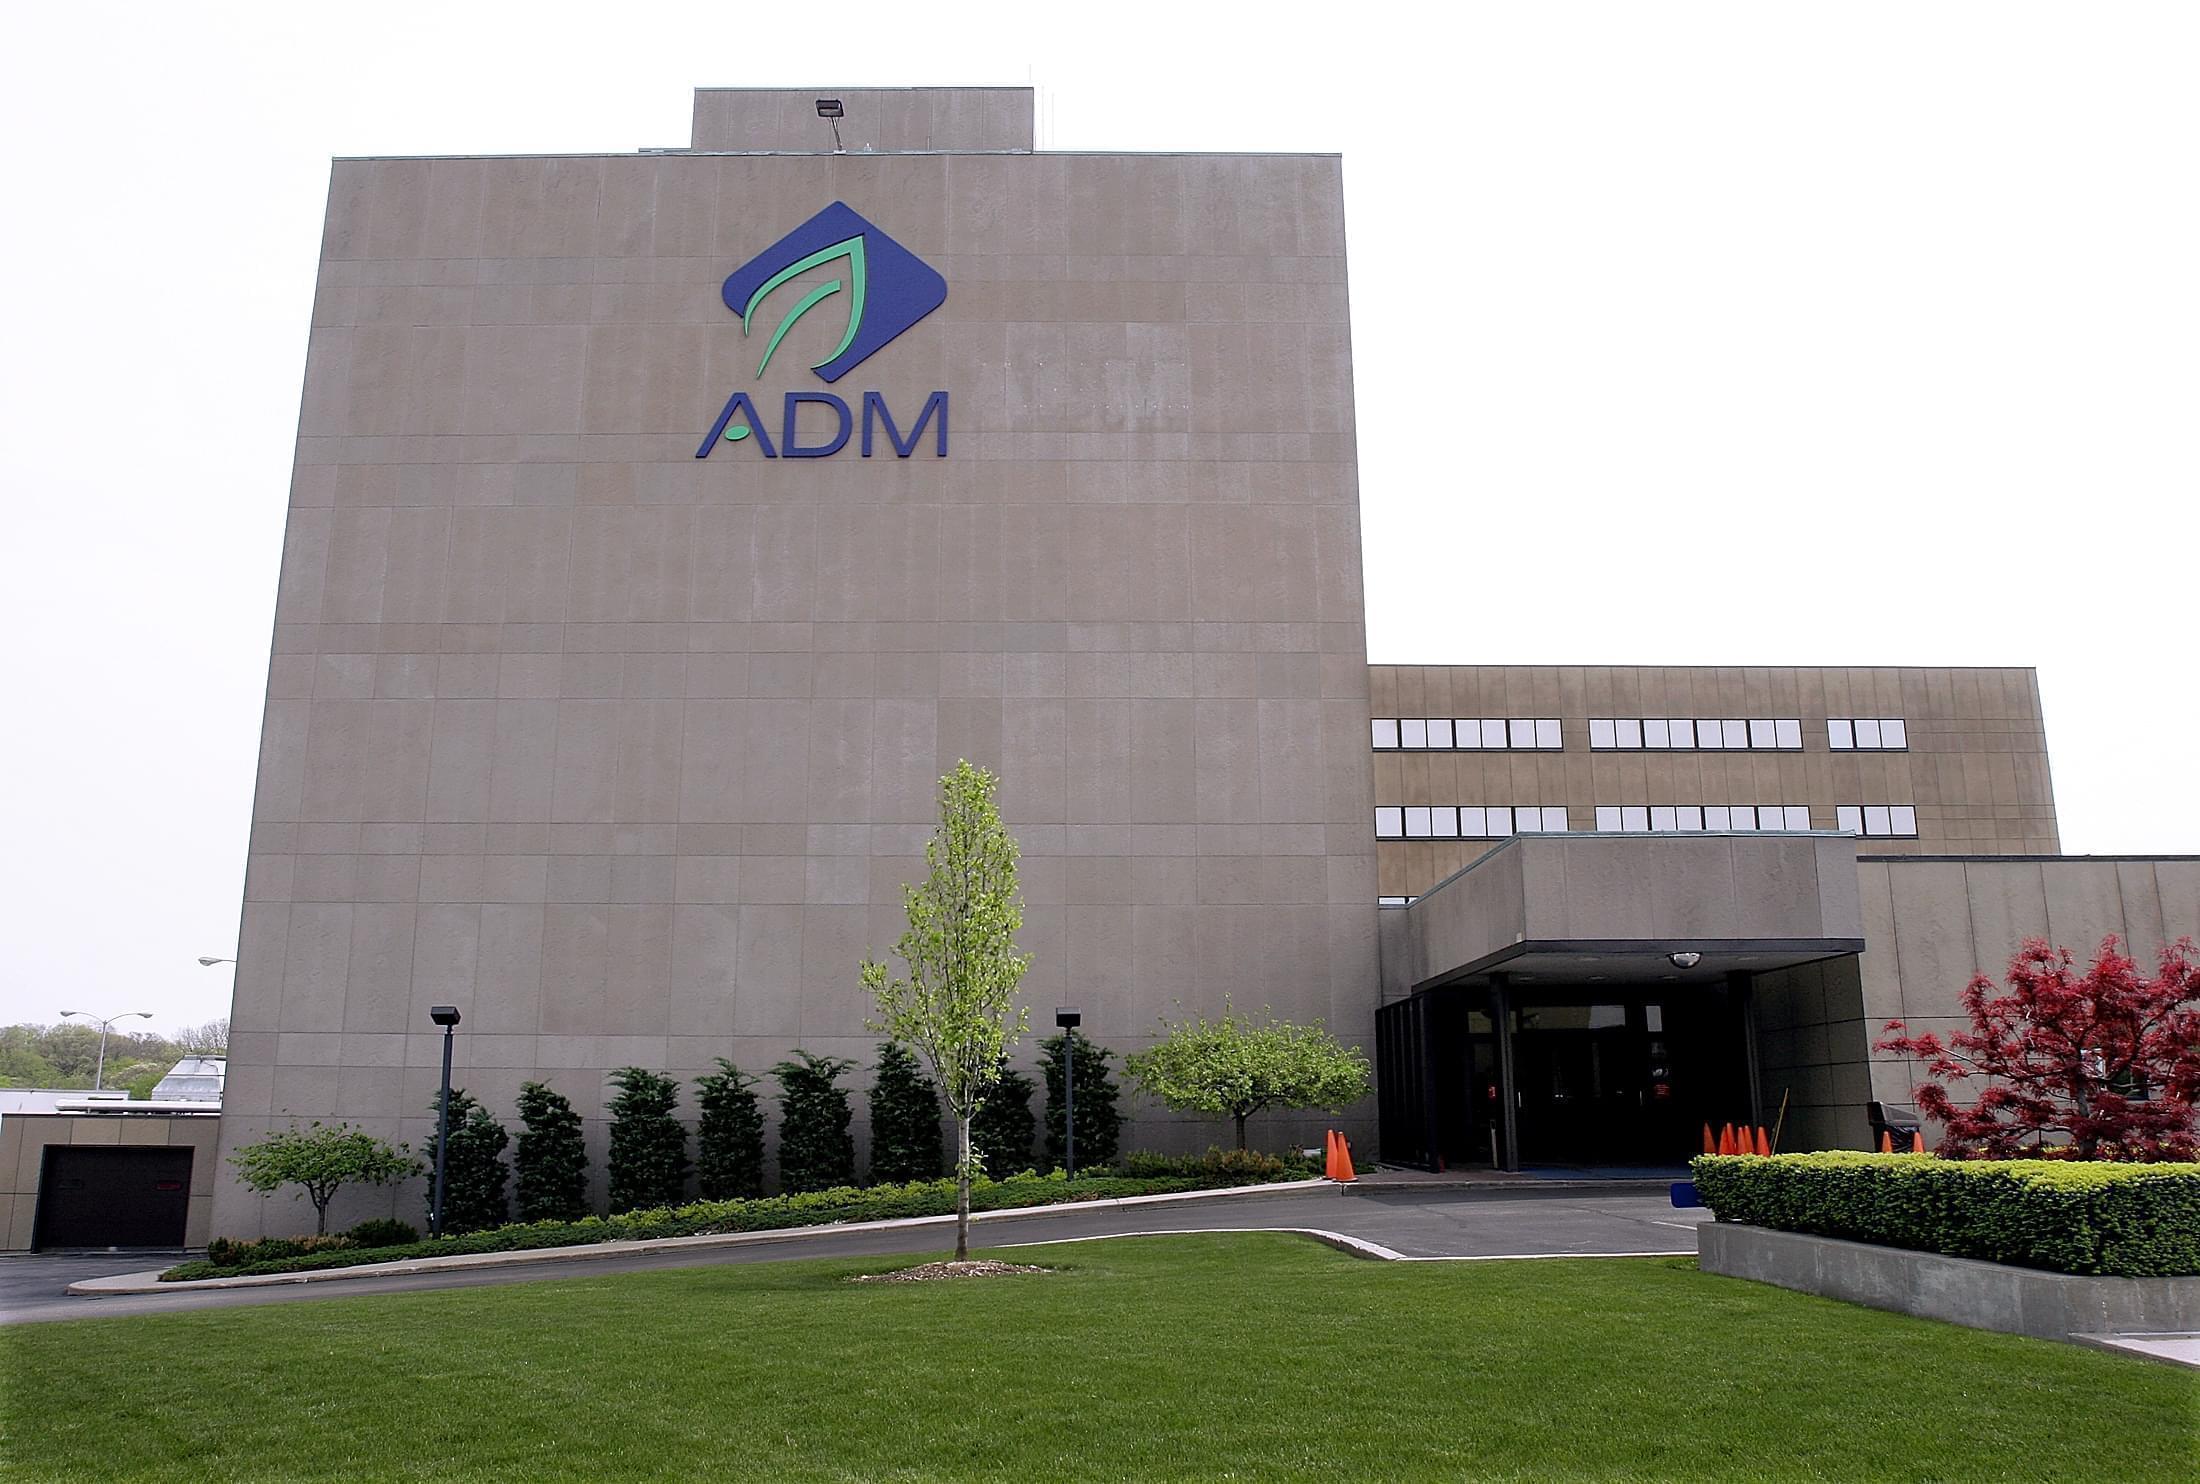 ADM - One of the world's biggest agricultural companies